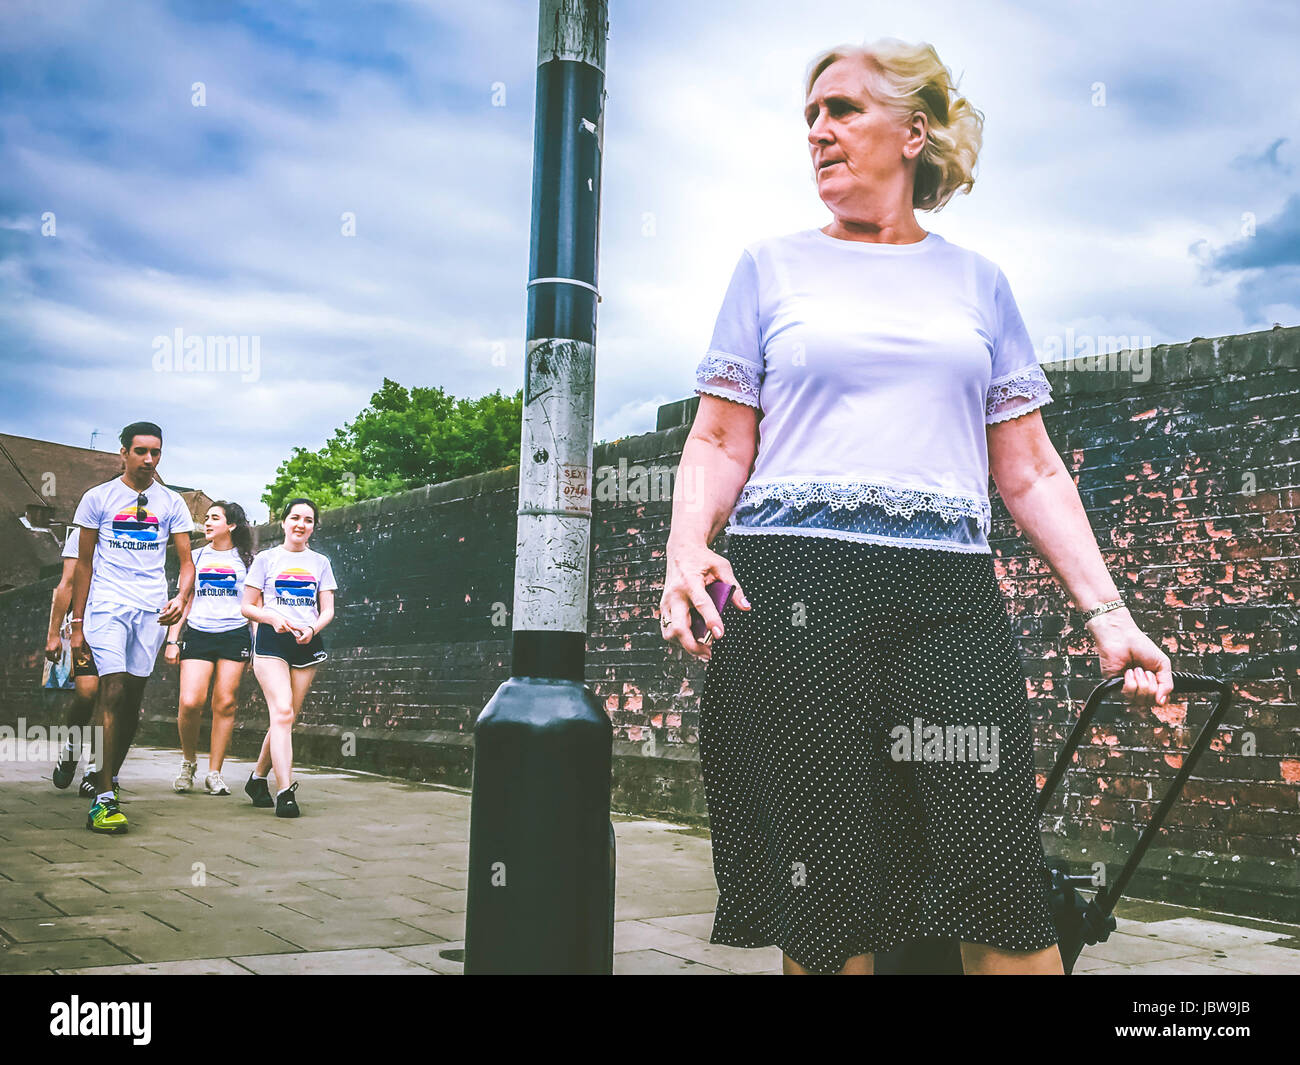 Street photography of a mid-50's woman walking in front of group youngster who is going to the color Run event in wembley, London Stock Photo